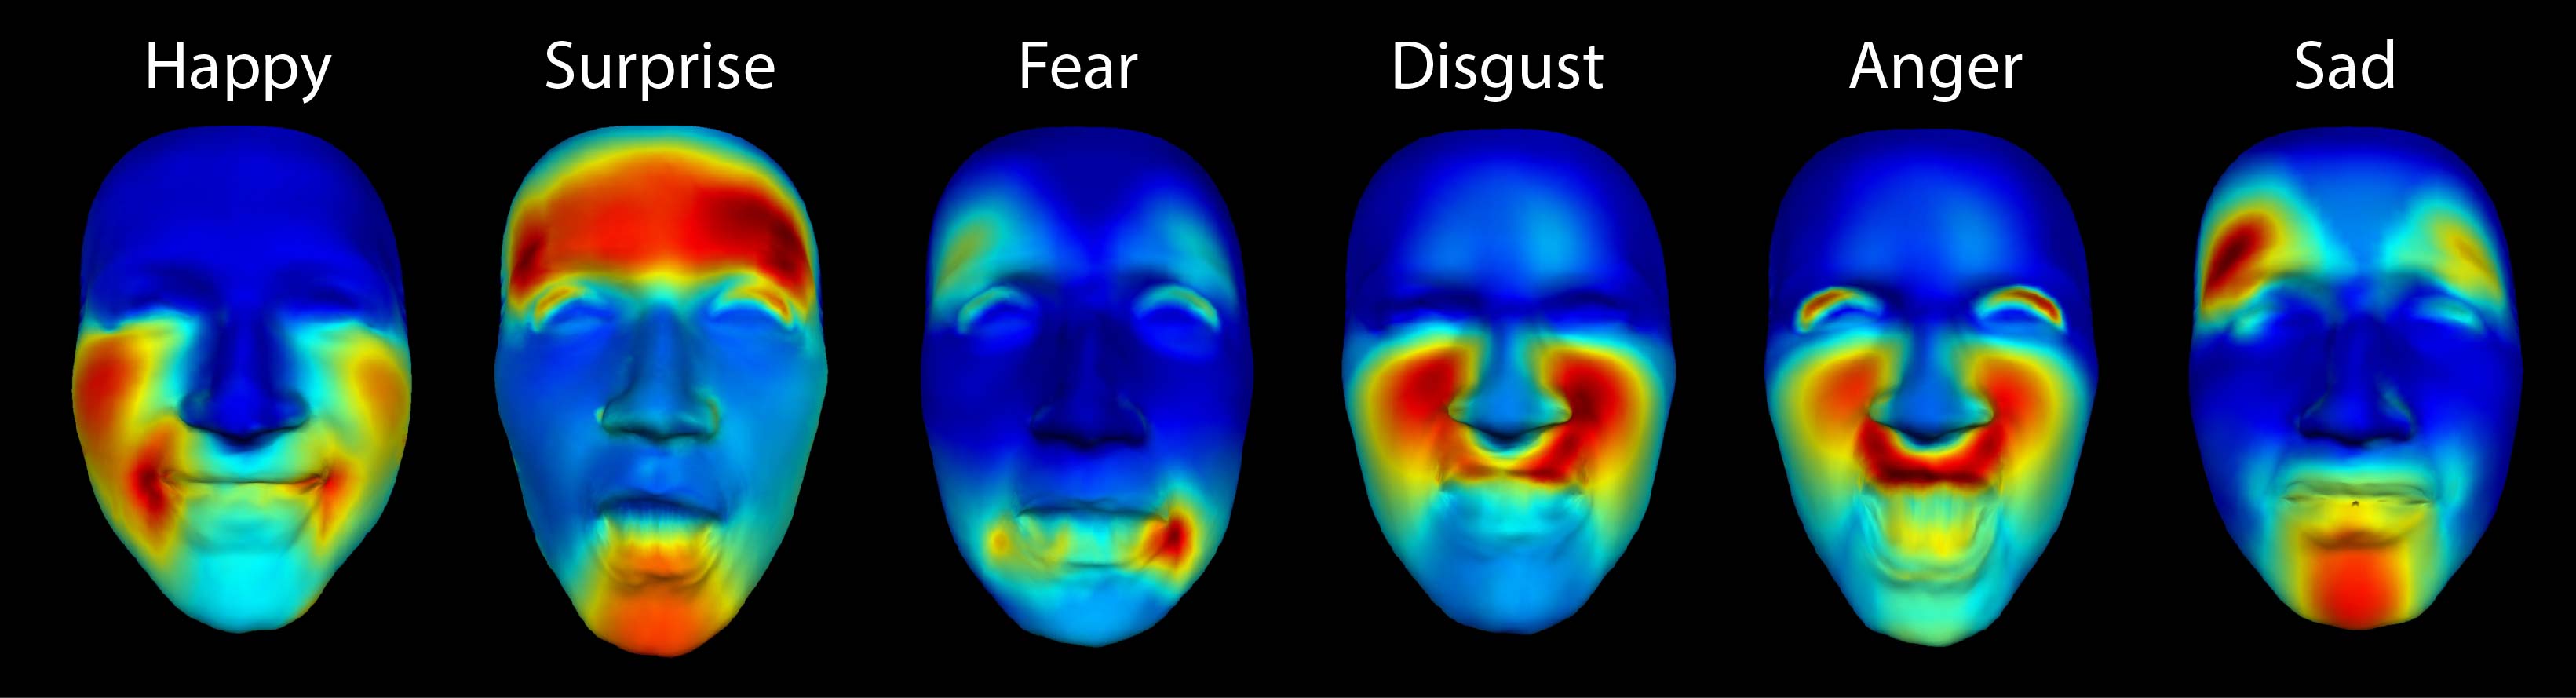 An image shows a set of six synthetic faces exhibiting characteristic facial shapes for various emotions. The faces are labeled happy, surprise, fear, disgust, anger, sad. 